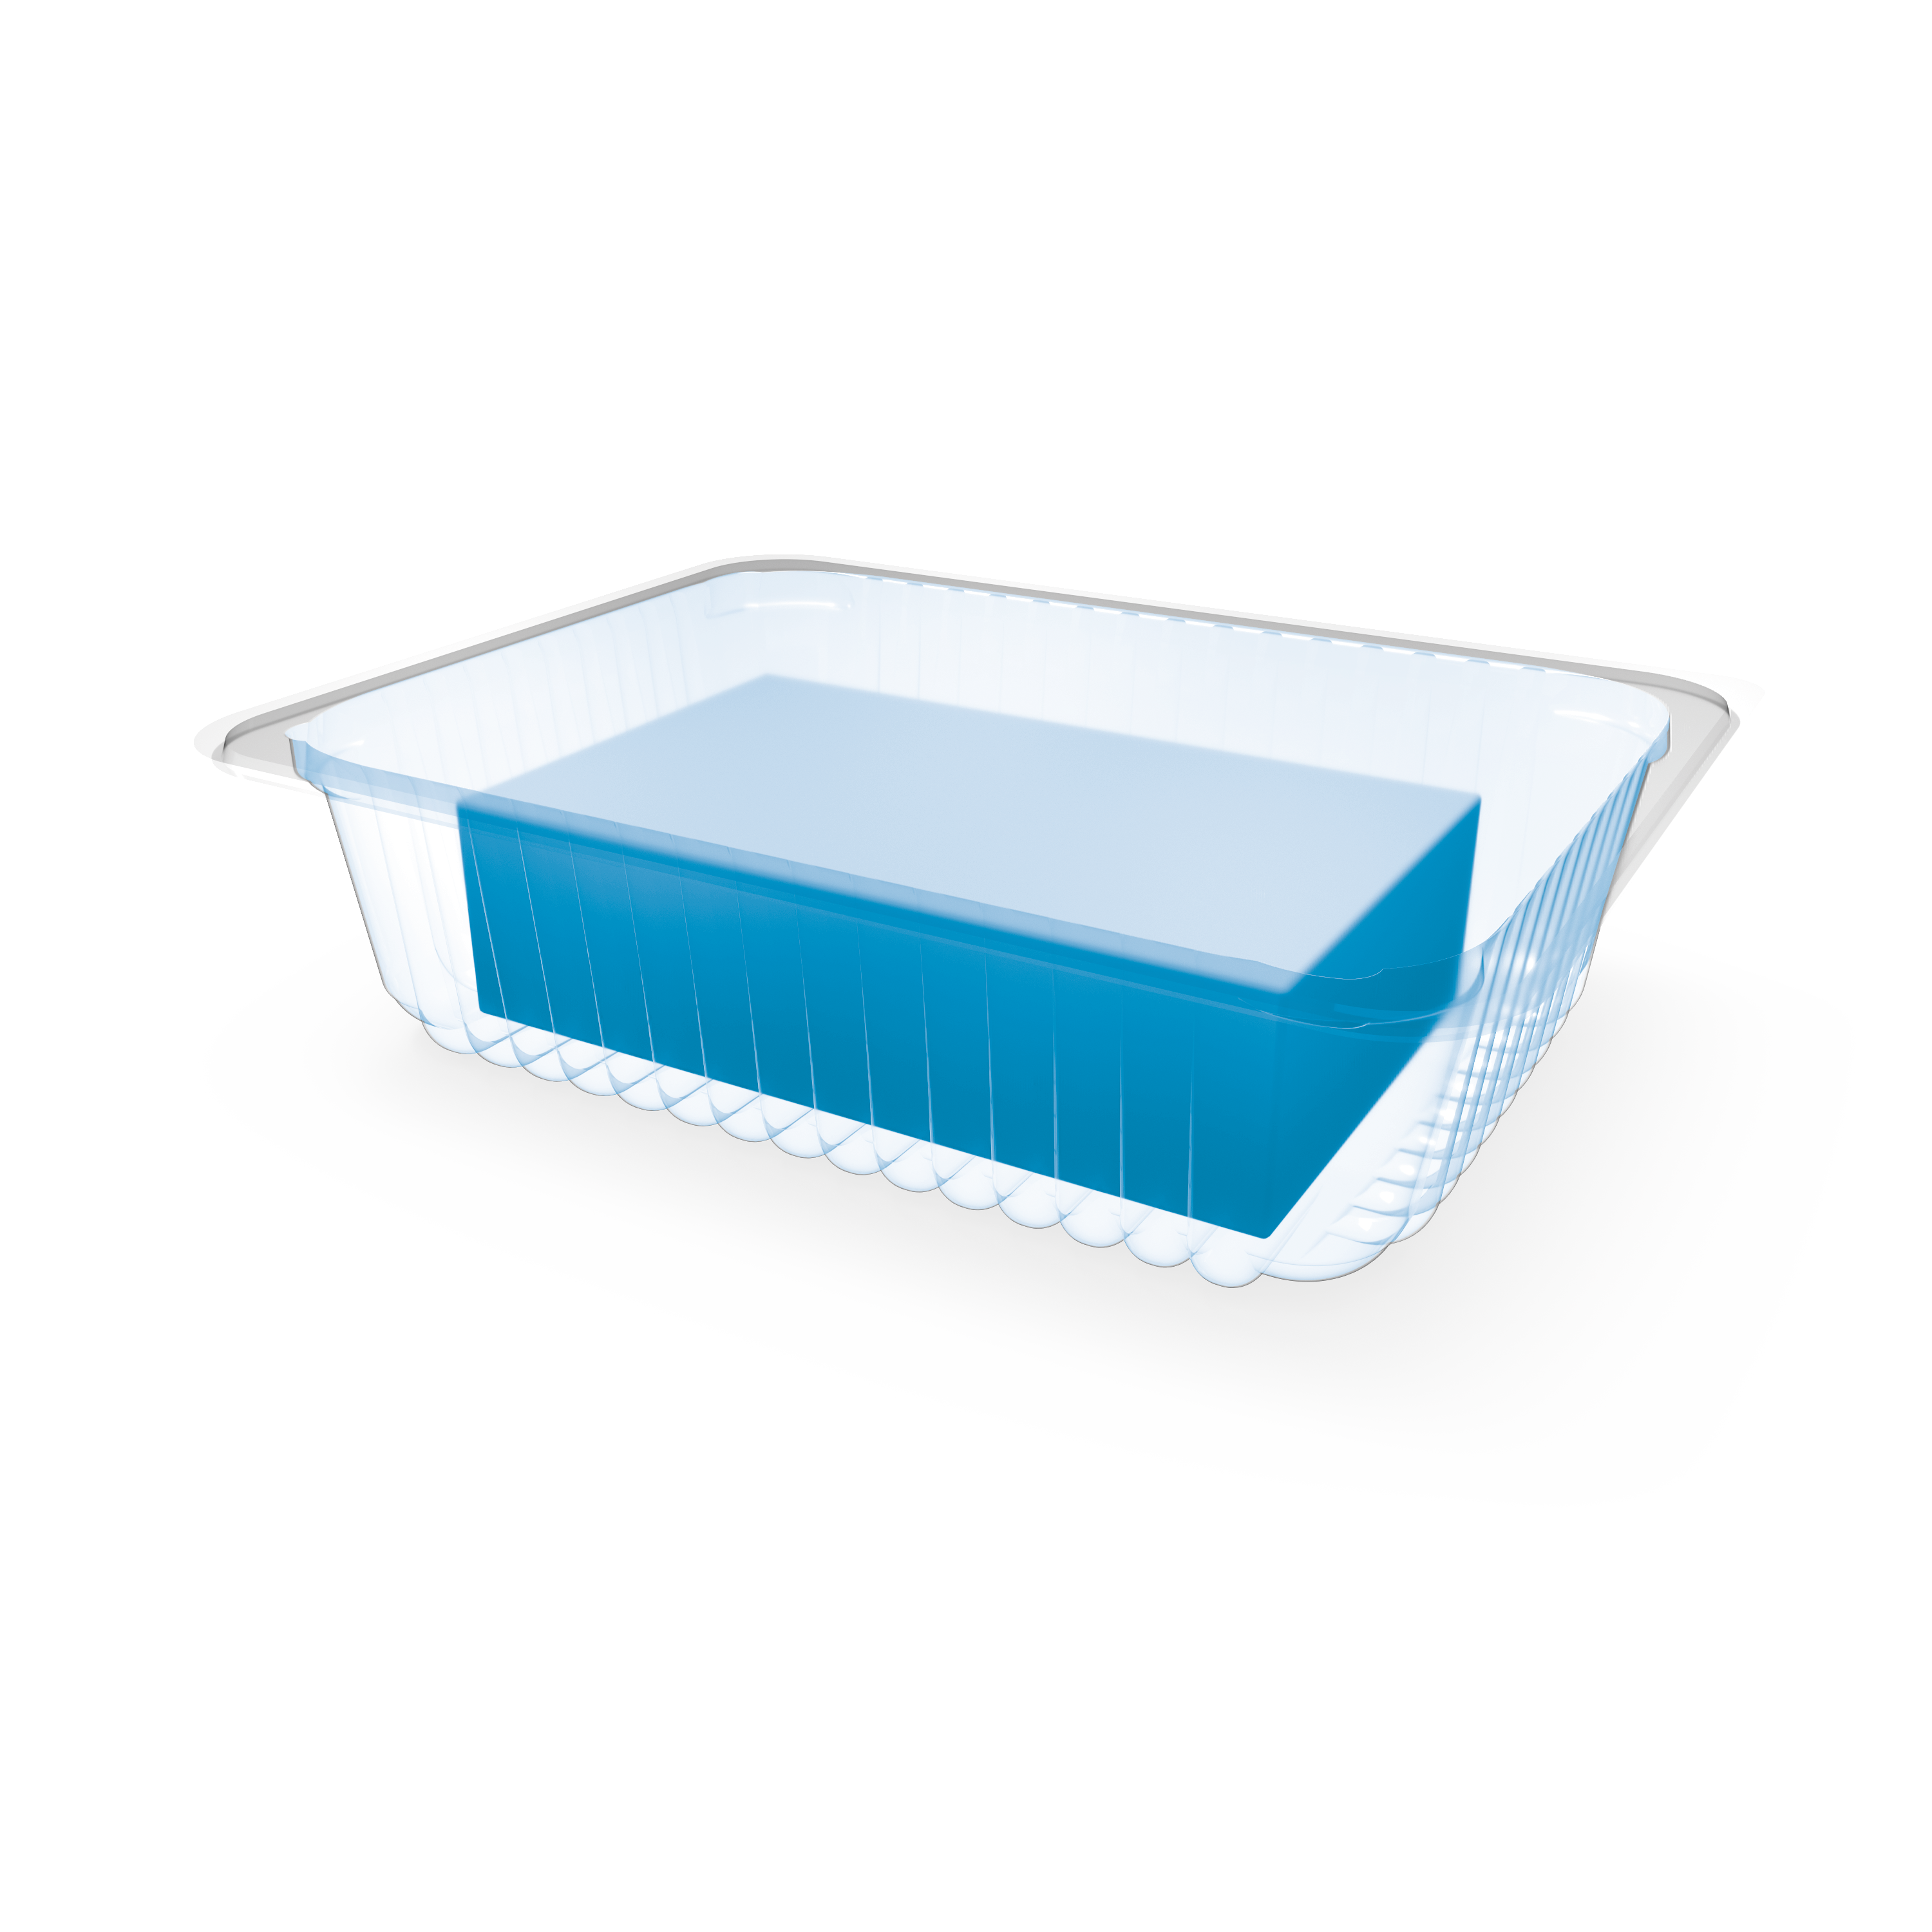 Single Layer STORAGE BOX, Clear Customisable Container